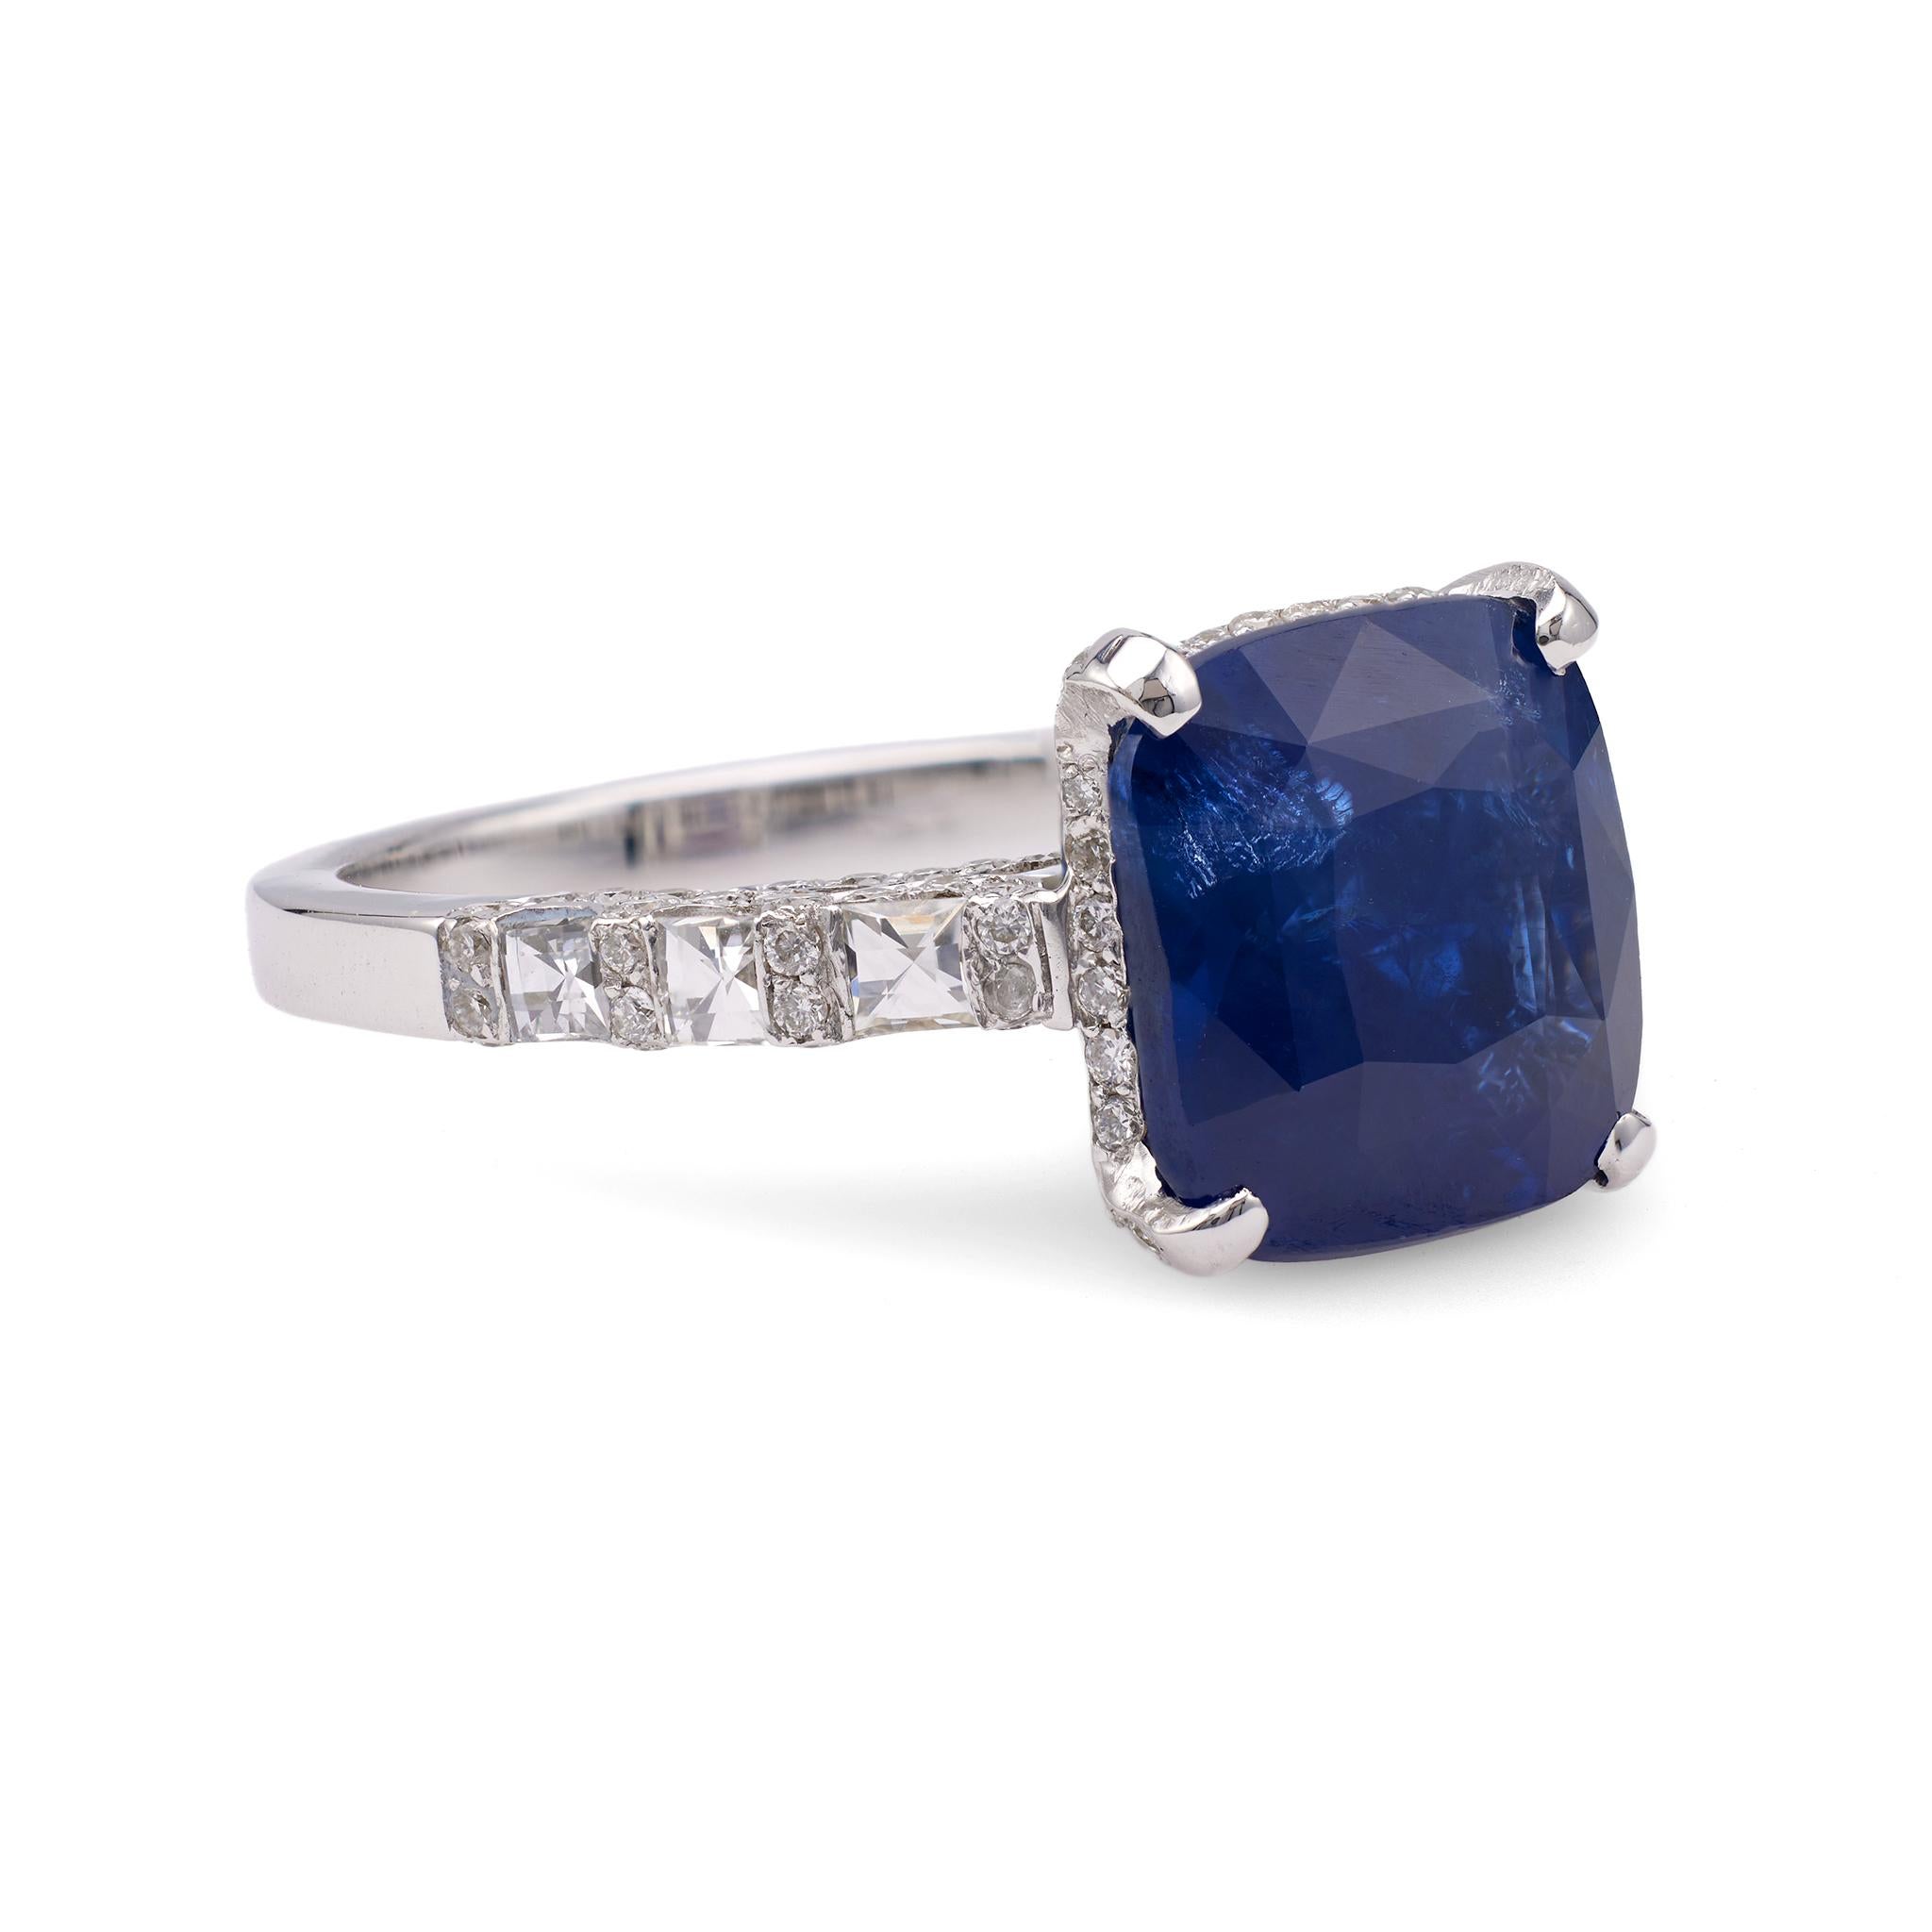 GIA 6.16 Carat Ceylon Sapphire Diamond 18k White Gold Ring In Excellent Condition For Sale In Beverly Hills, CA